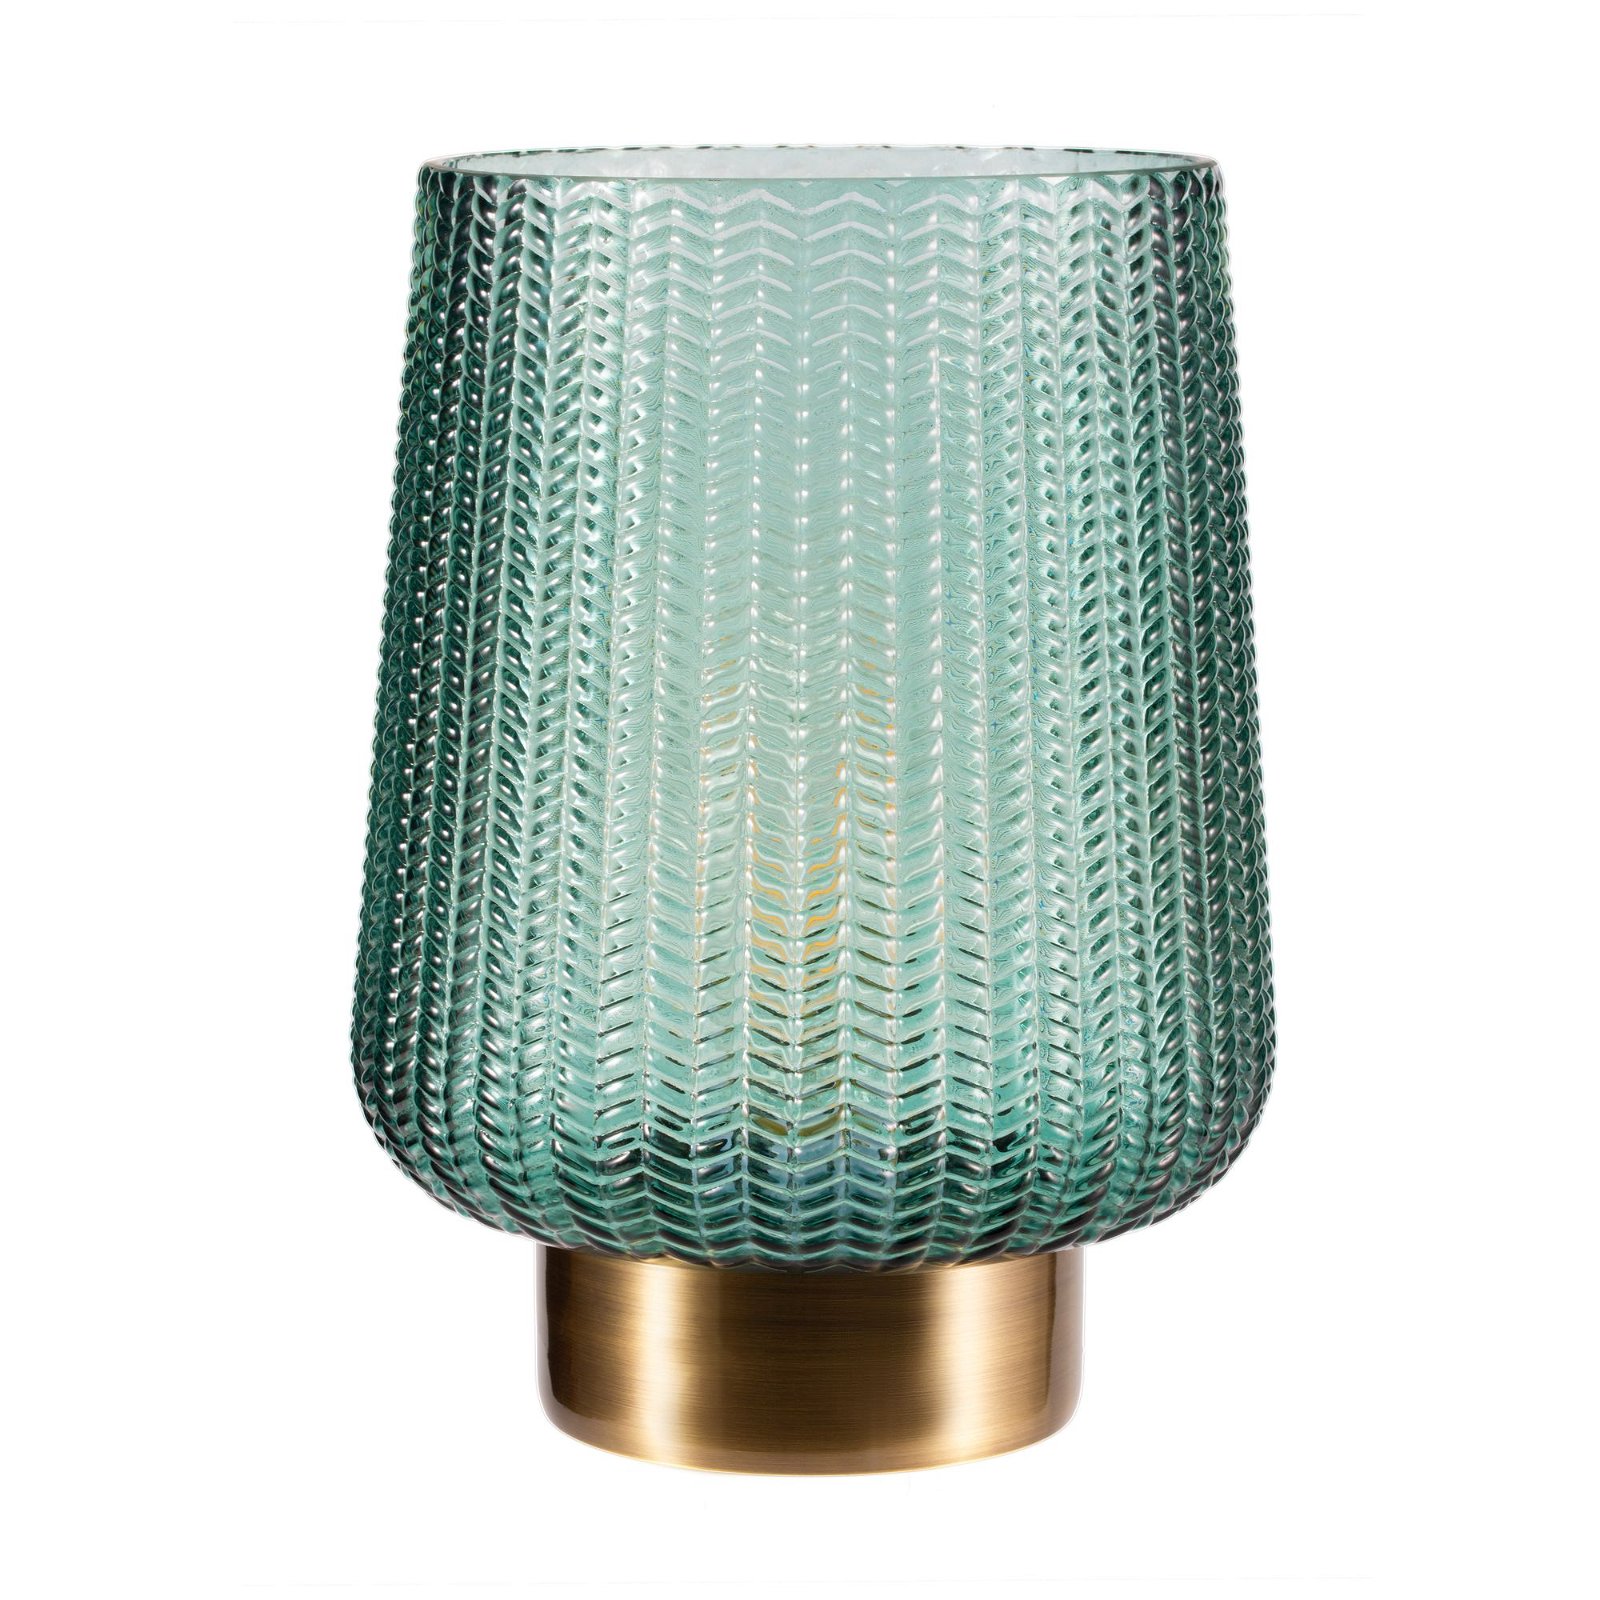 Pauleen Table luminaire Pretty Glamour E27 2700K 40lm 0,8W Brass/Turquoise